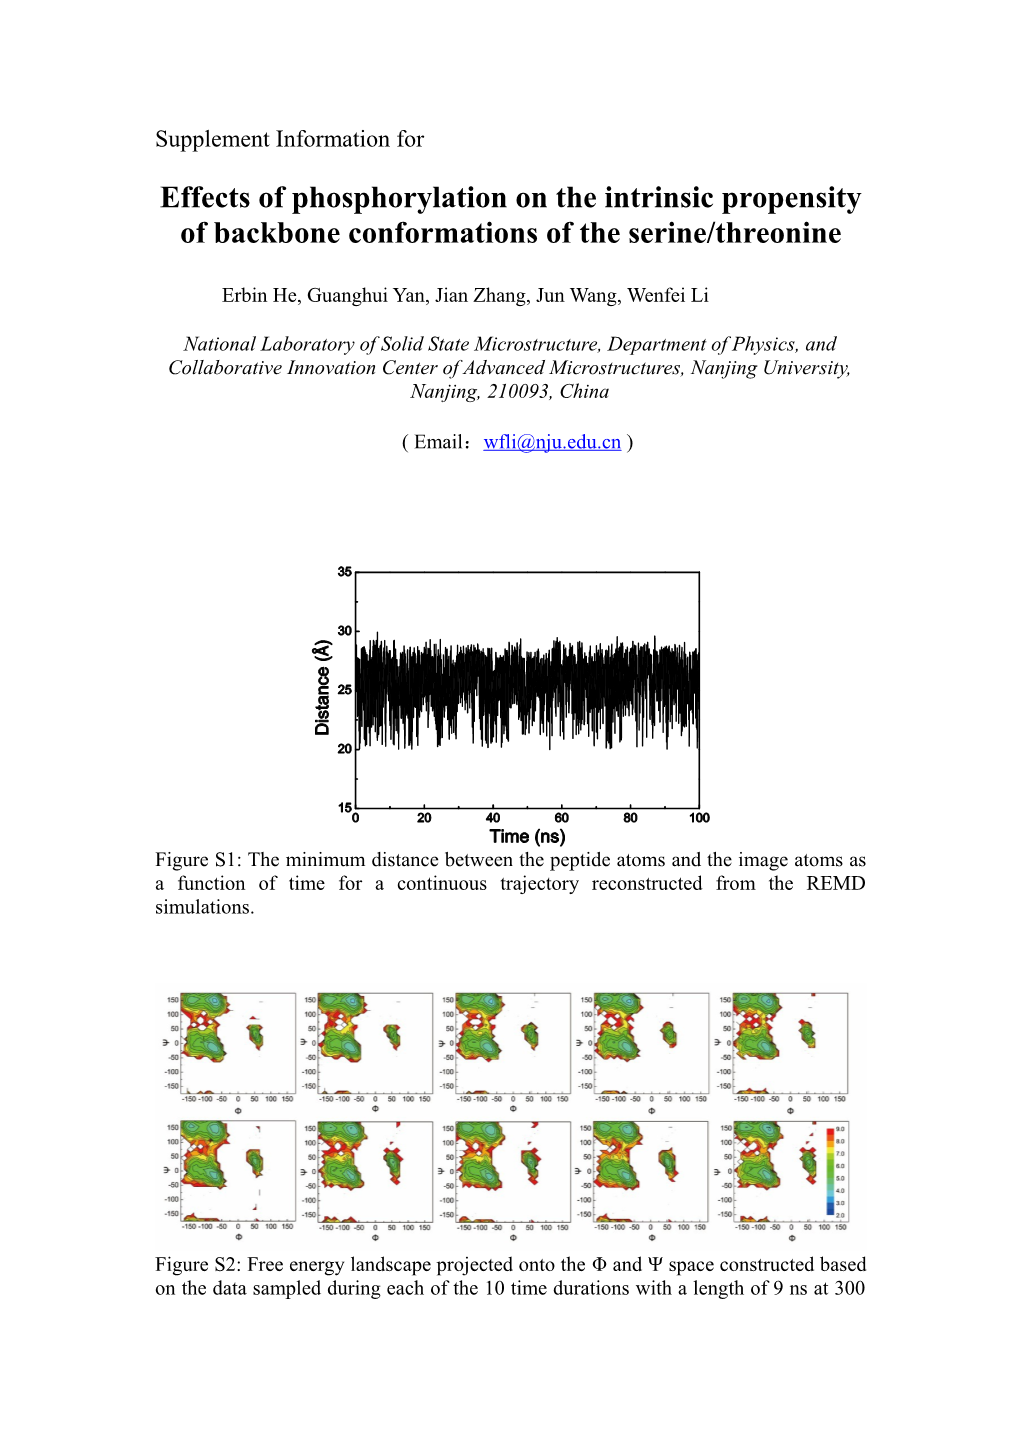 Effects of Phosphorylation on the Intrinsicpropensity of Backbone Conformations of The